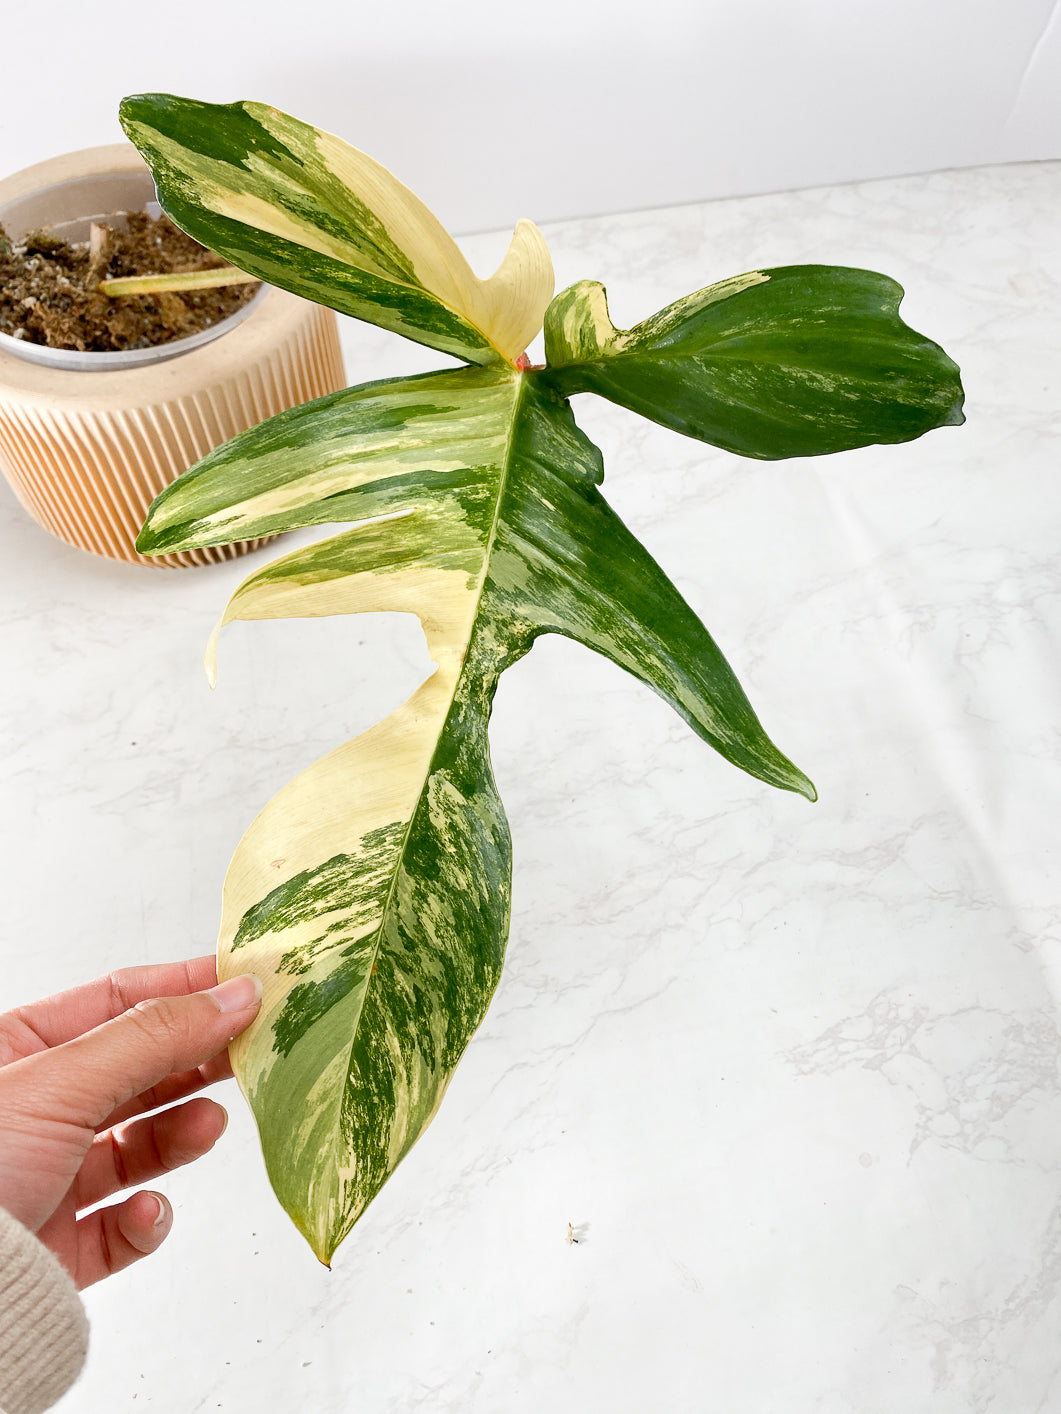 Philodendron Florida Beauty  Huge mature leaf Rooting multiple nodes